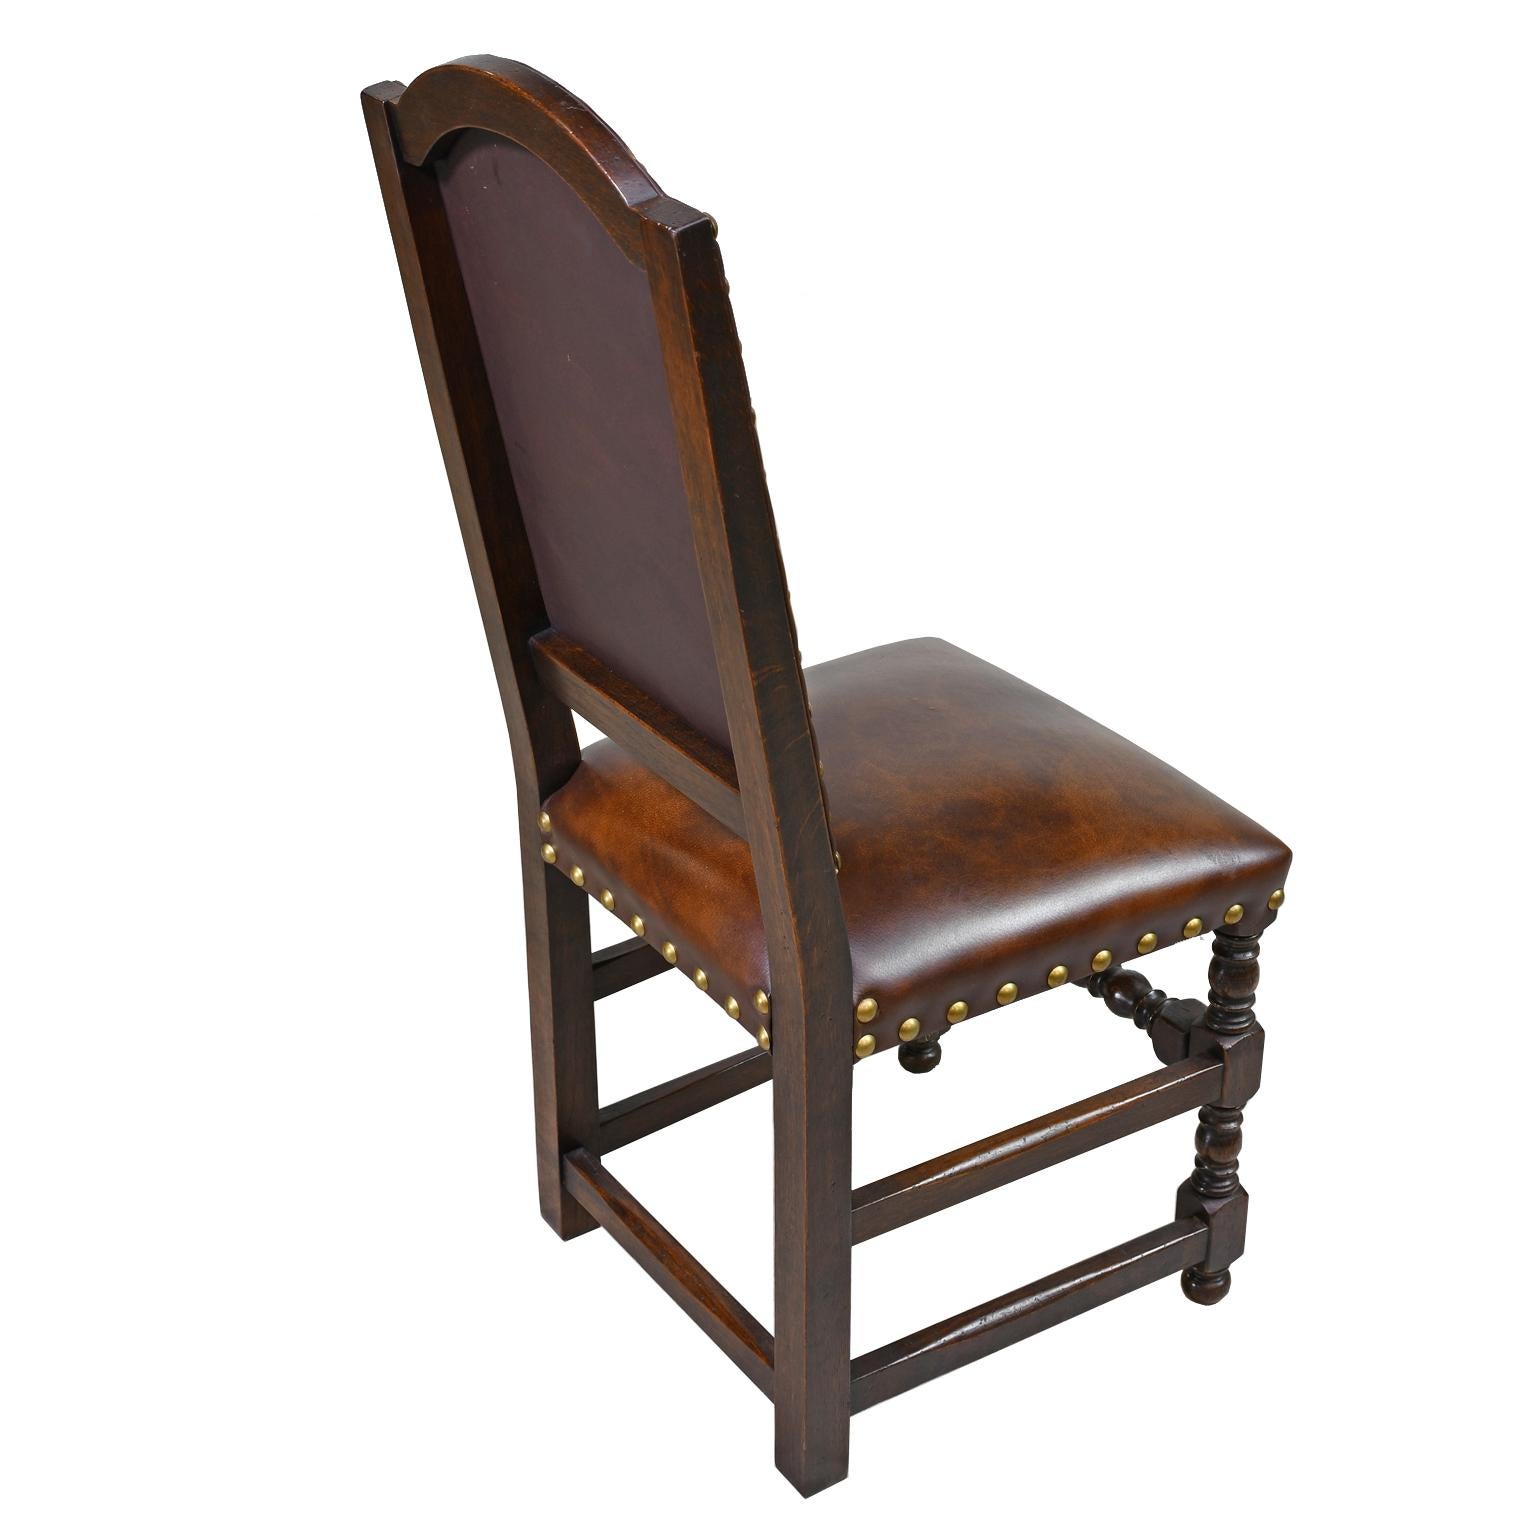 Pair of Jacobean Style Oak Dining Chairs with Leather Upholstery, Belgium 1